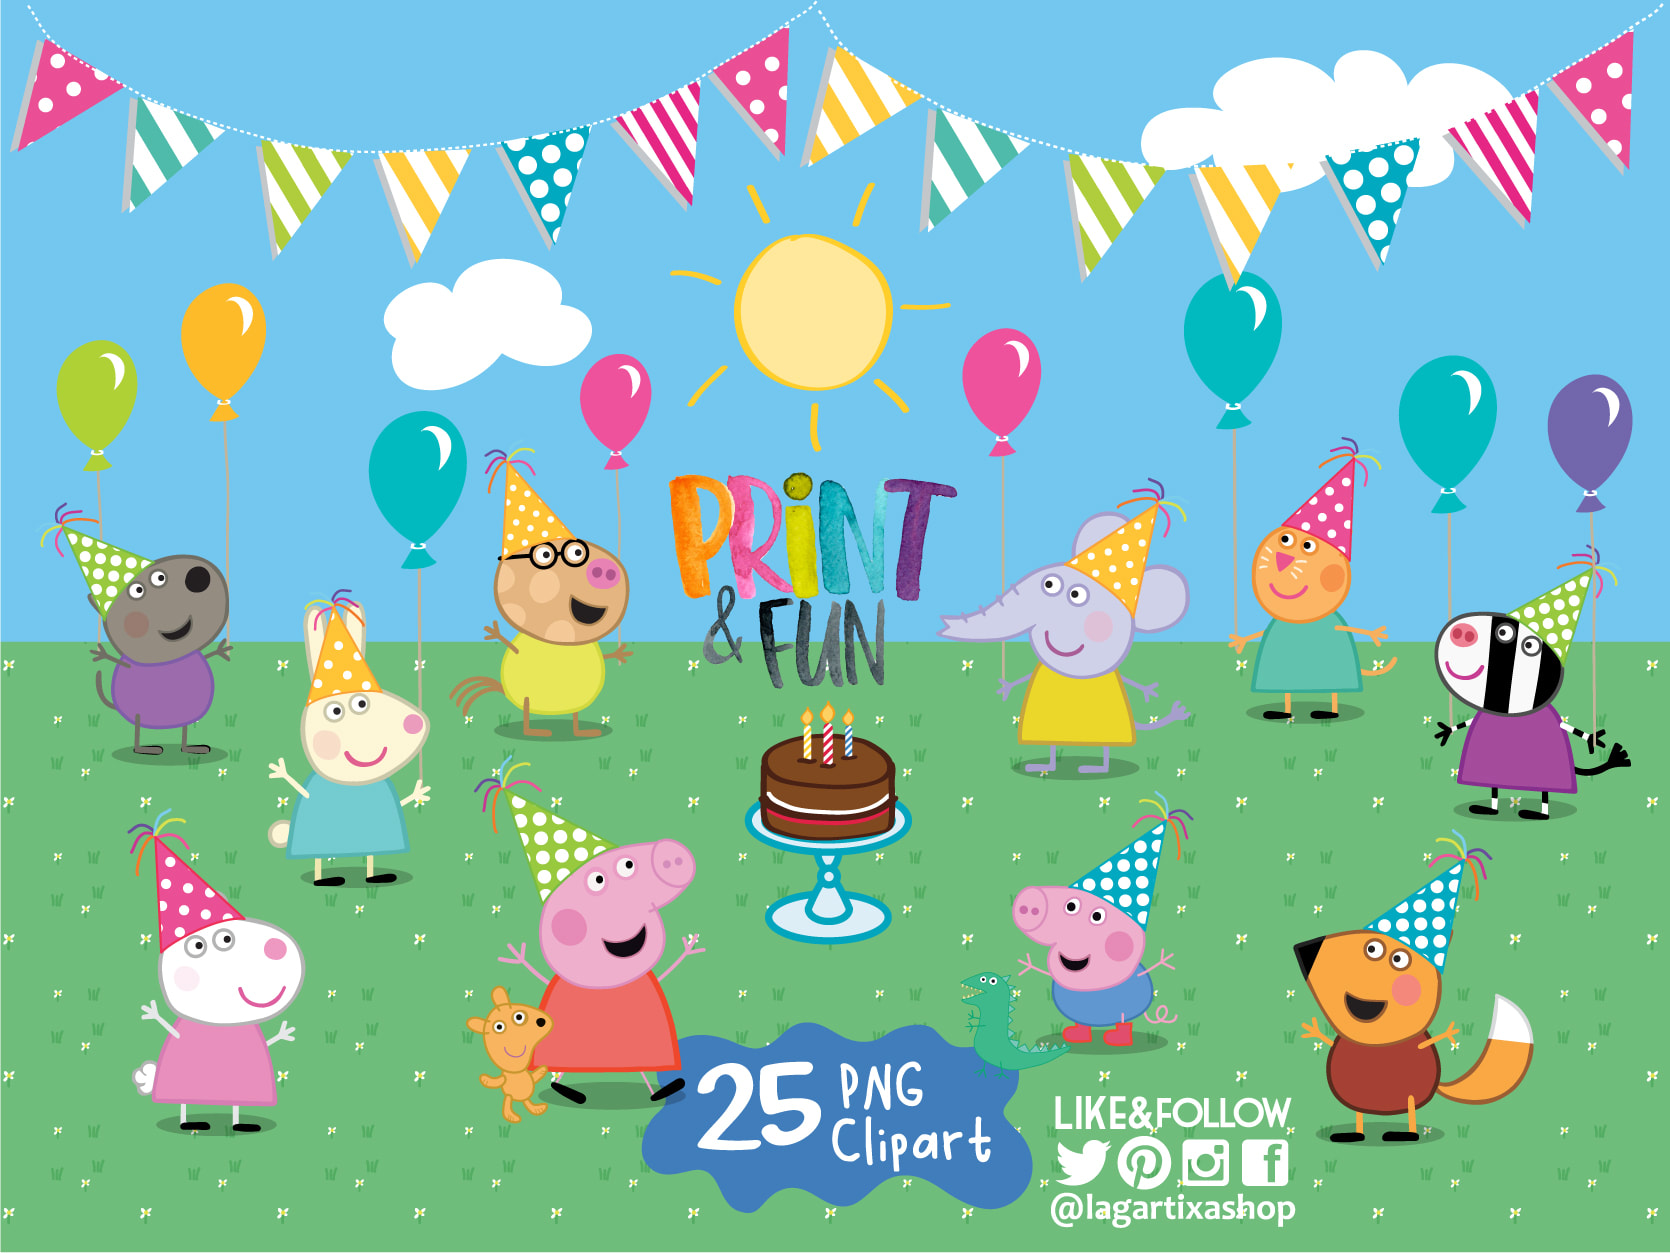 verdiepen verontschuldiging groei Peppa Pig & George and friends Birthday Party PNG Clipart elements,  Background, cake, balloons, party hats event decoration